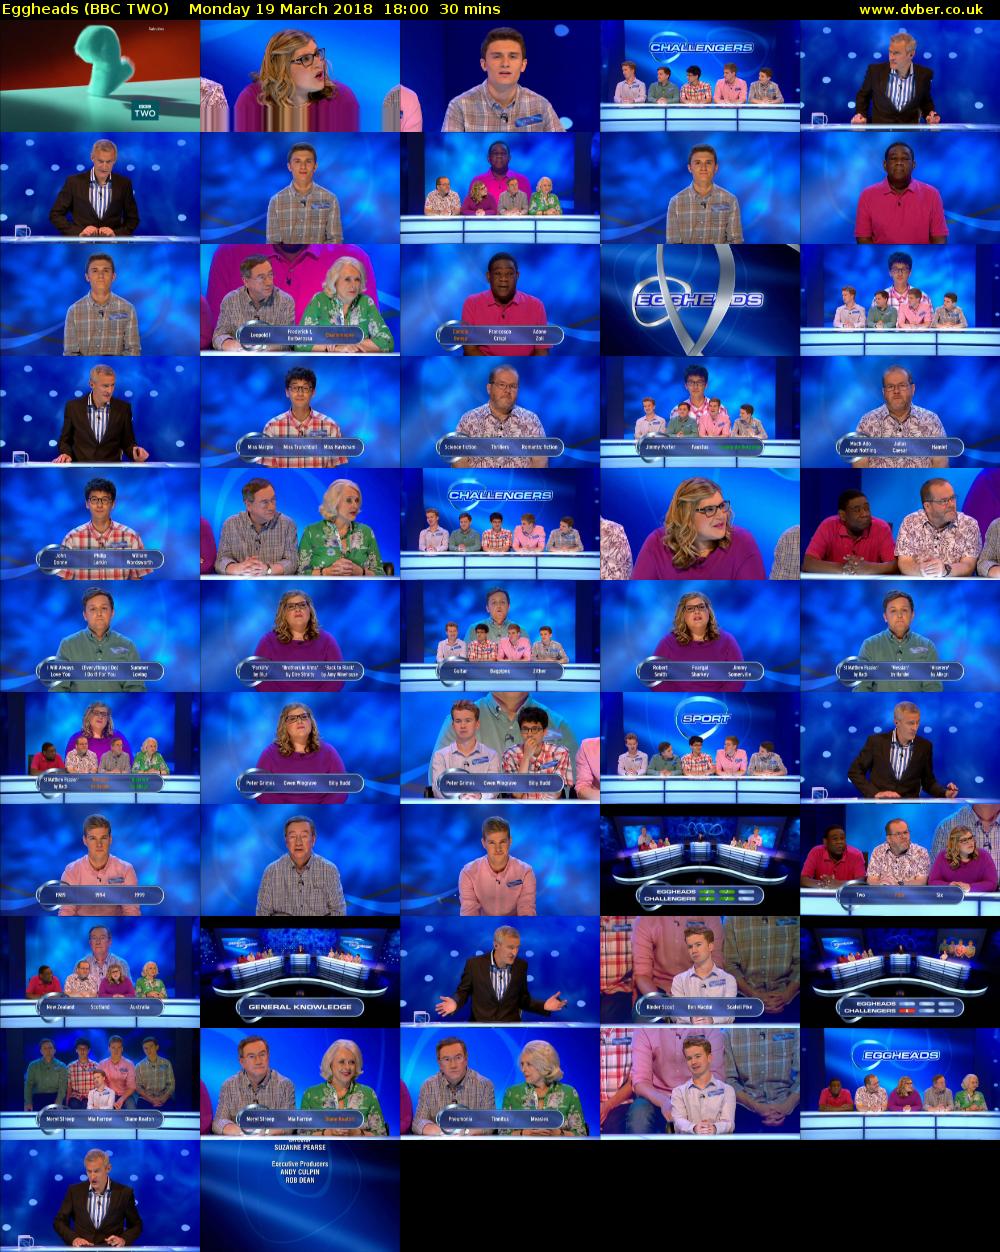 Eggheads (BBC TWO) Monday 19 March 2018 18:00 - 18:30